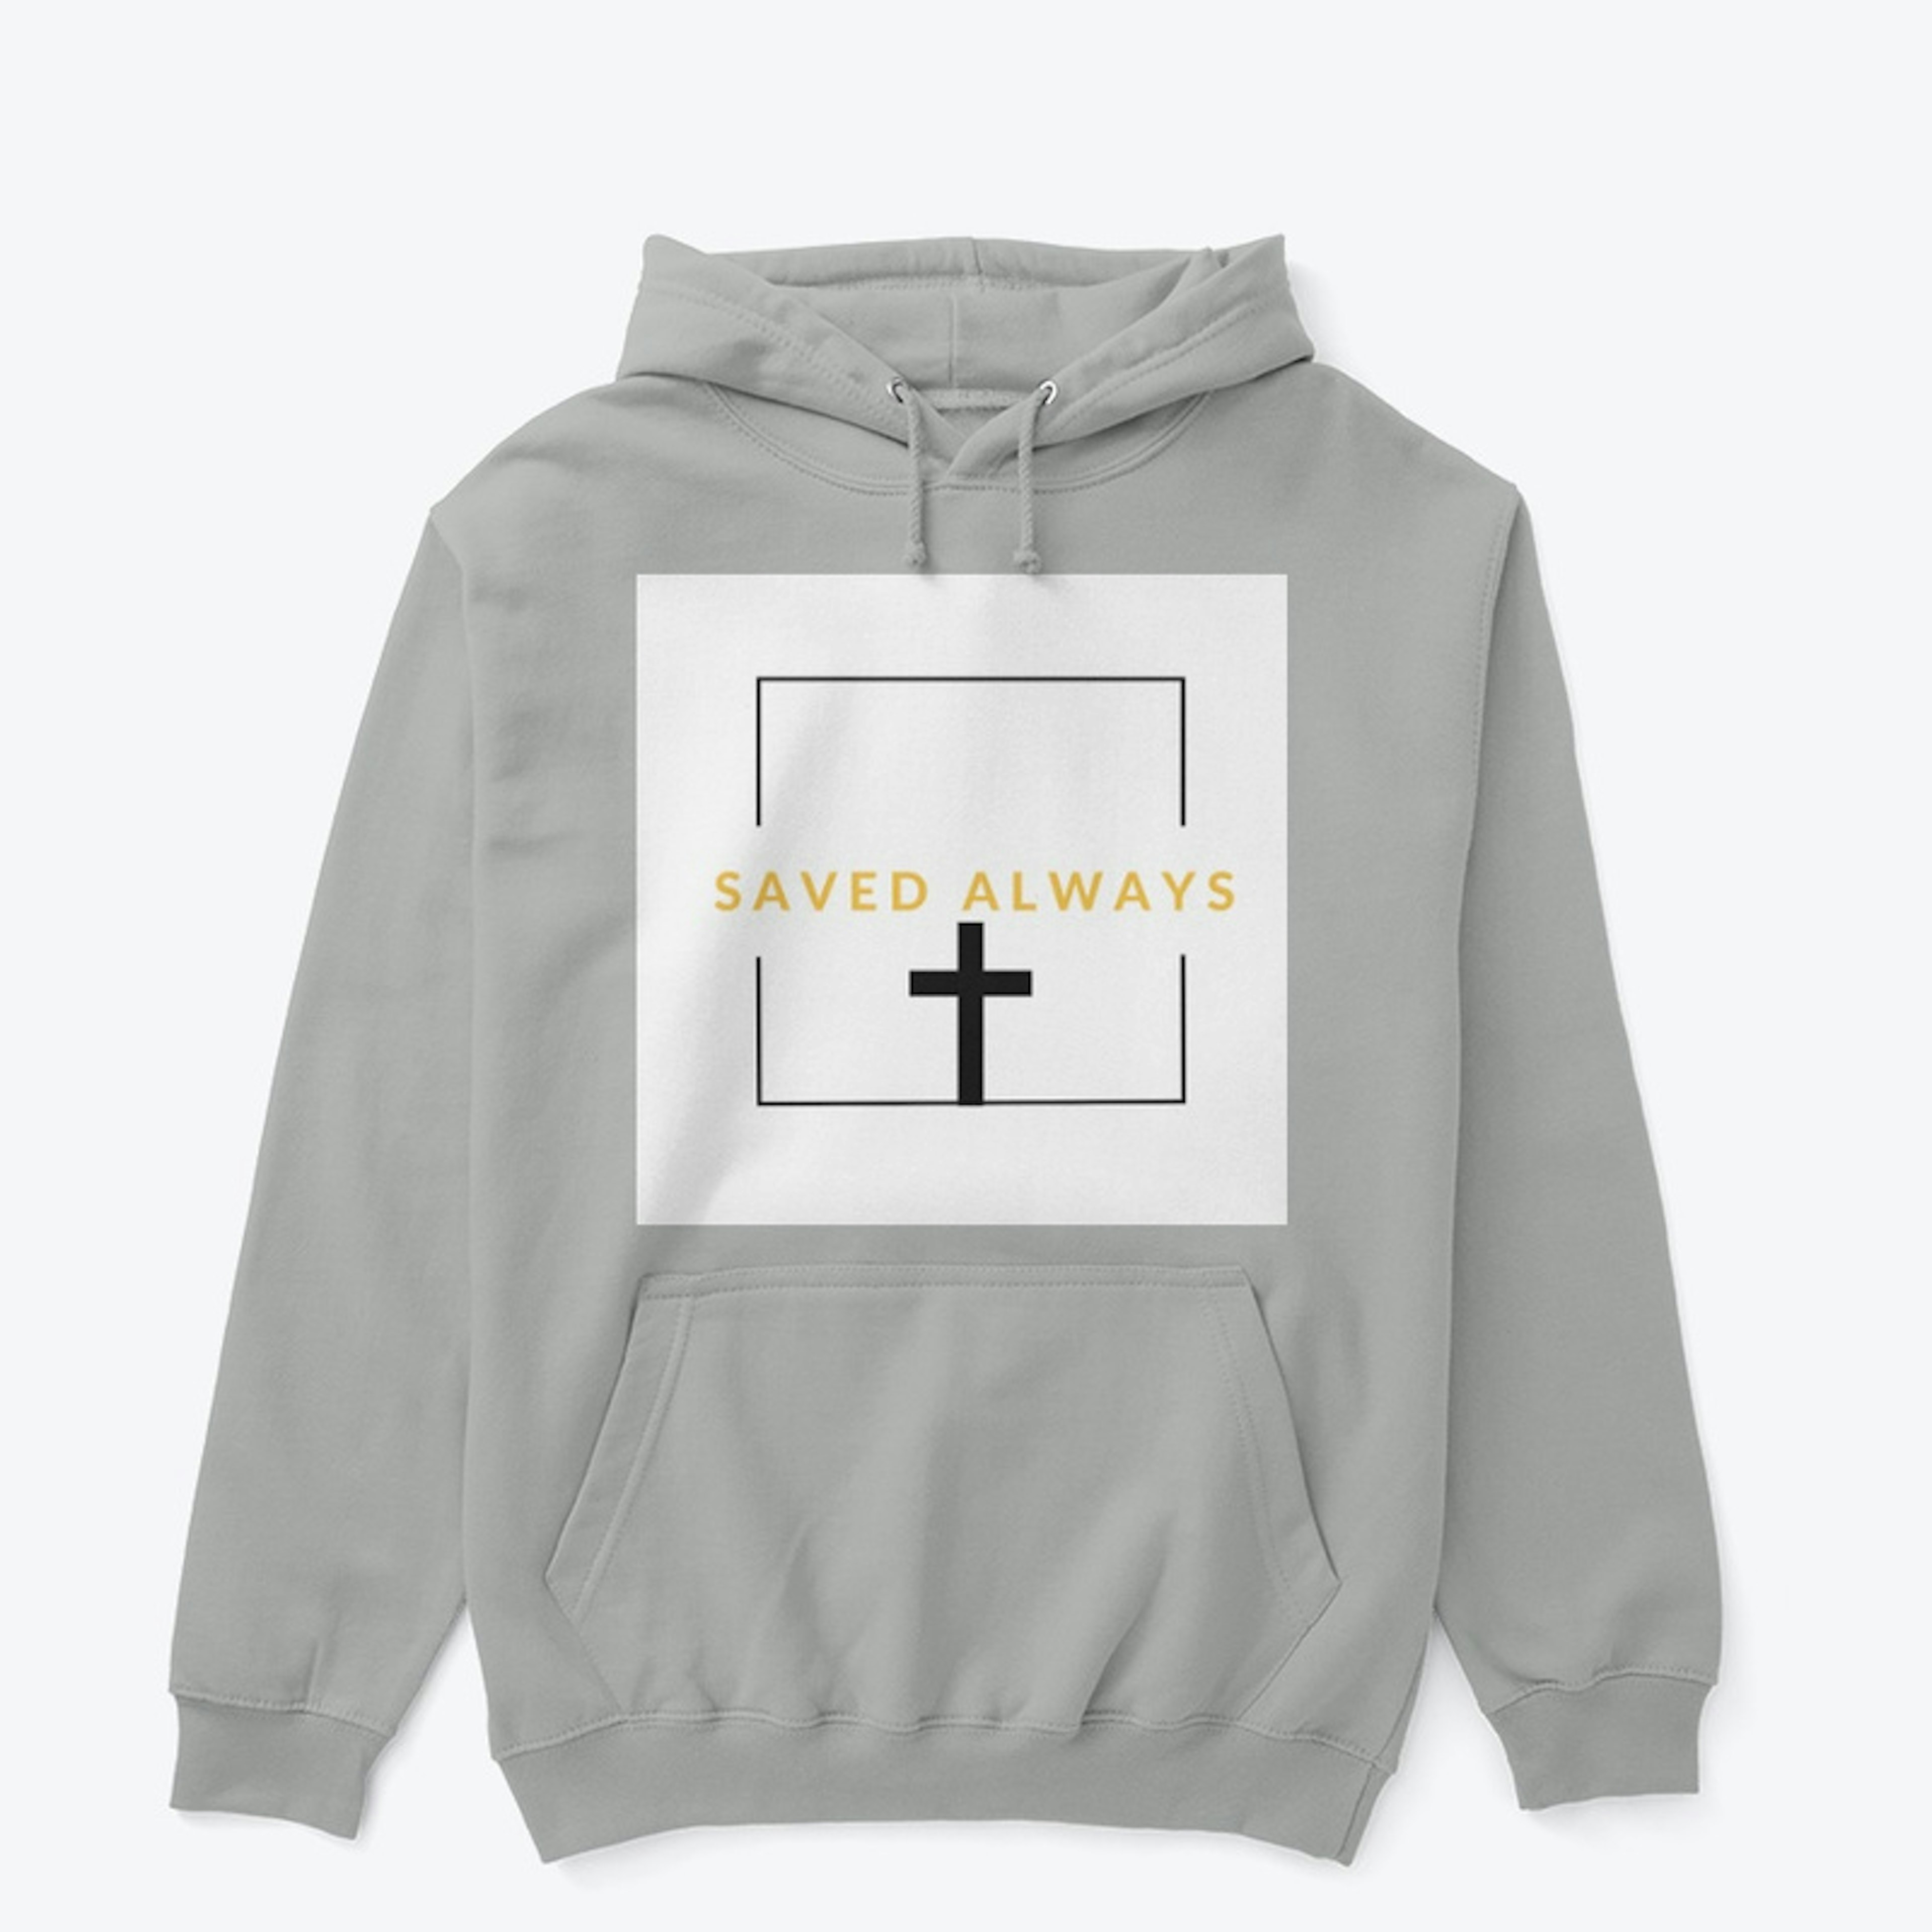 Saved always (male/unisex) collection